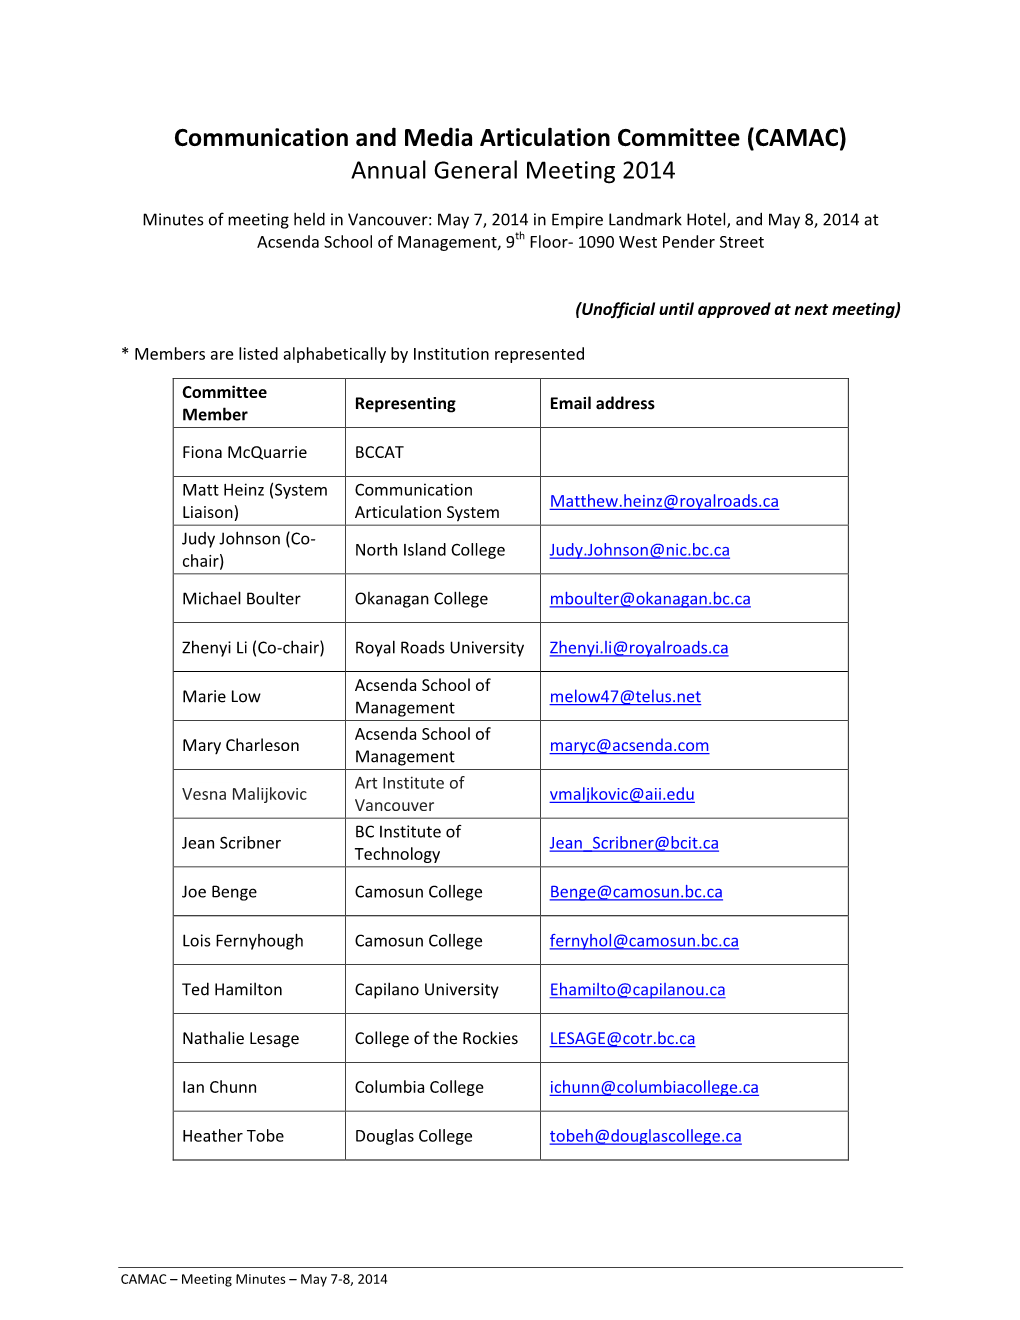 Communication and Media Articulation Committee (CAMAC) Annual General Meeting 2014